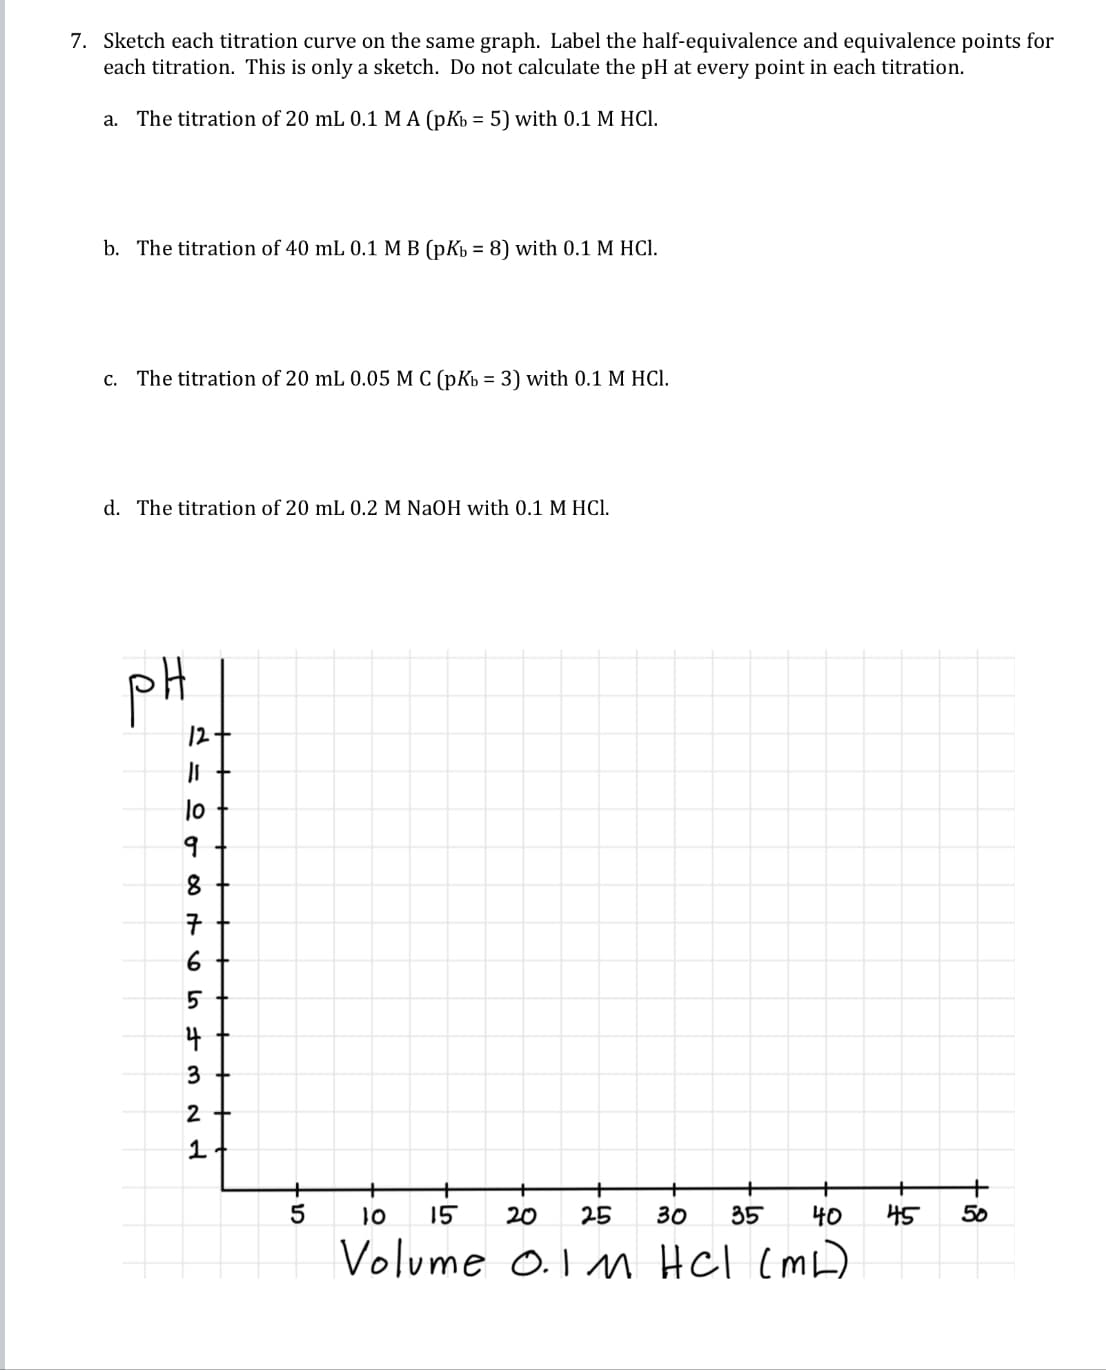 7. Sketch each titration curve on the same graph. Label the half-equivalence and equivalence points for
each titration. This is only a sketch. Do not calculate the pH at every point in each titration.
a. The titration of 20 mL 0.1 MA (pKb = 5) with 0.1 M HCl.
b. The titration of 40 mL 0.1 MB (pKb = 8) with 0.1 M HCl.
c. The titration of 20 mL 0.05 M C (pKb = 3) with 0.1 M HCl.
d. The titration of 20 mL 0.2 M NaOH with 0.1 M HCl.
рн
+
5
10 15
20 25
30 35 40
Volume 0.1 M HCl (ML)
2161 00 it in Im
lo
9
8
7
6
5
4
3
2
PN
1
+
+
45 50